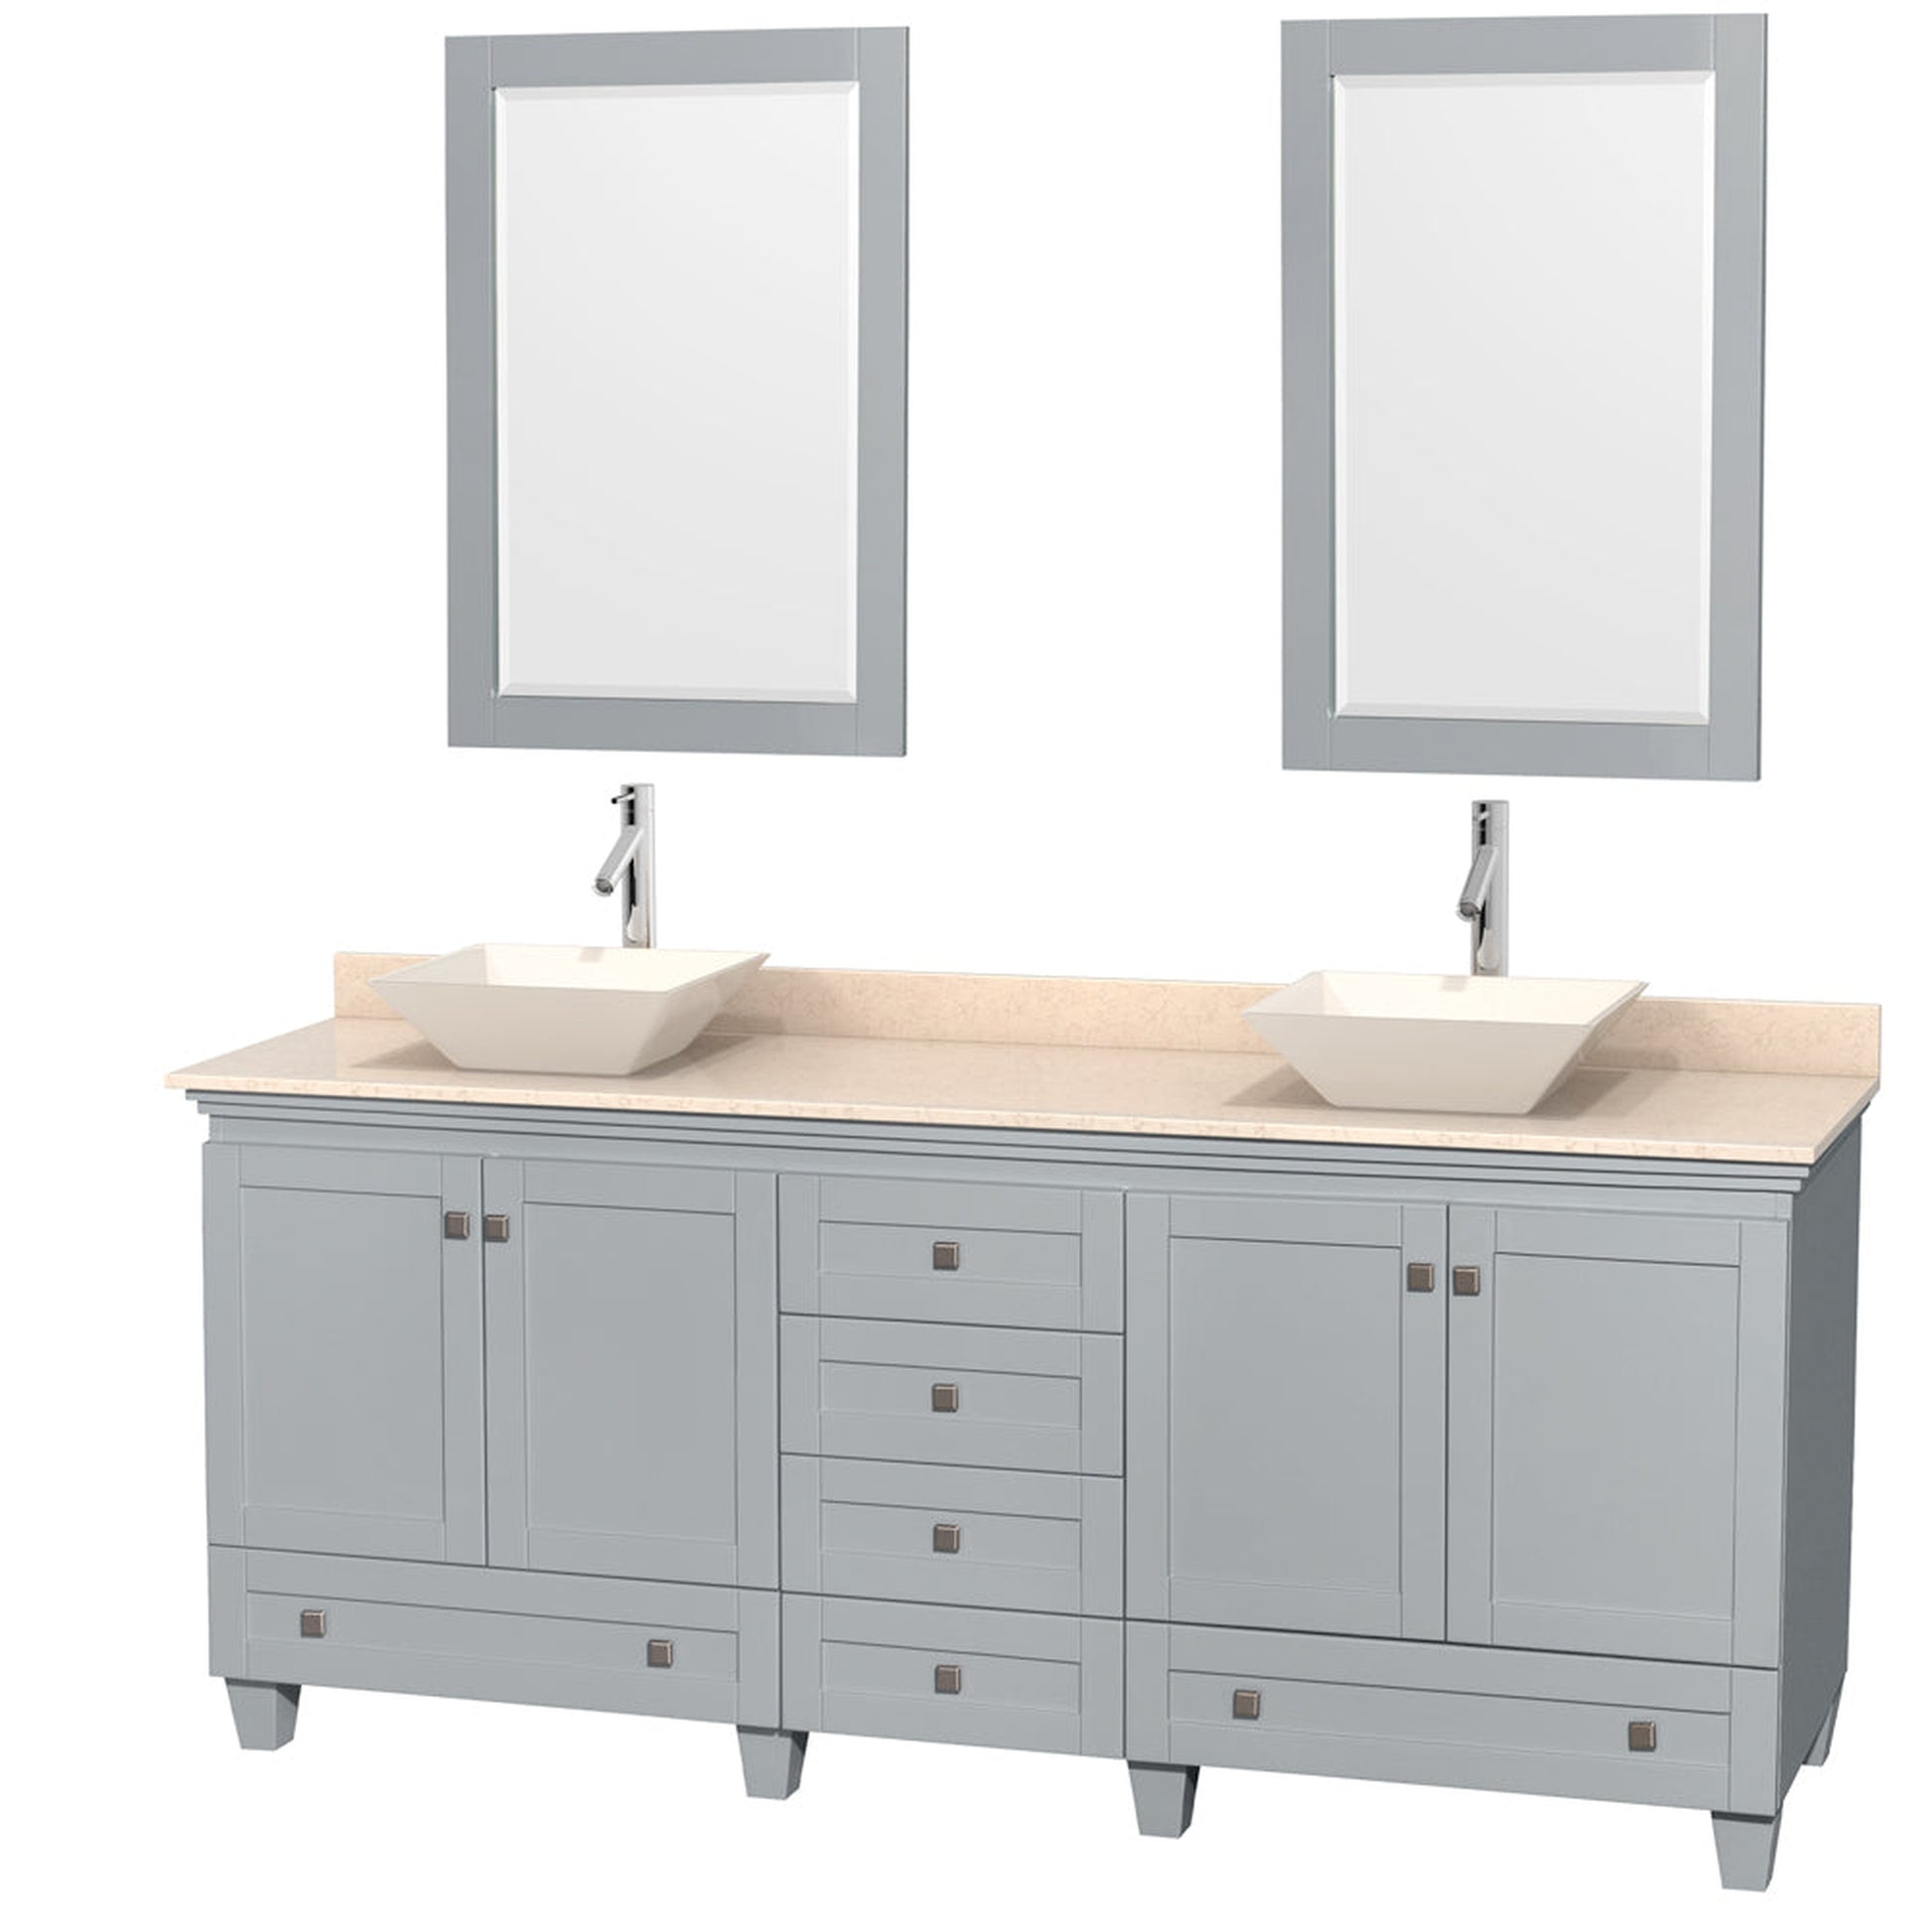 Wyndham Collection Acclaim 80" Double Bathroom Vanity in Oyster Gray With Ivory Marble Countertop, Pyra Bone Porcelain Sink & 24" Mirror